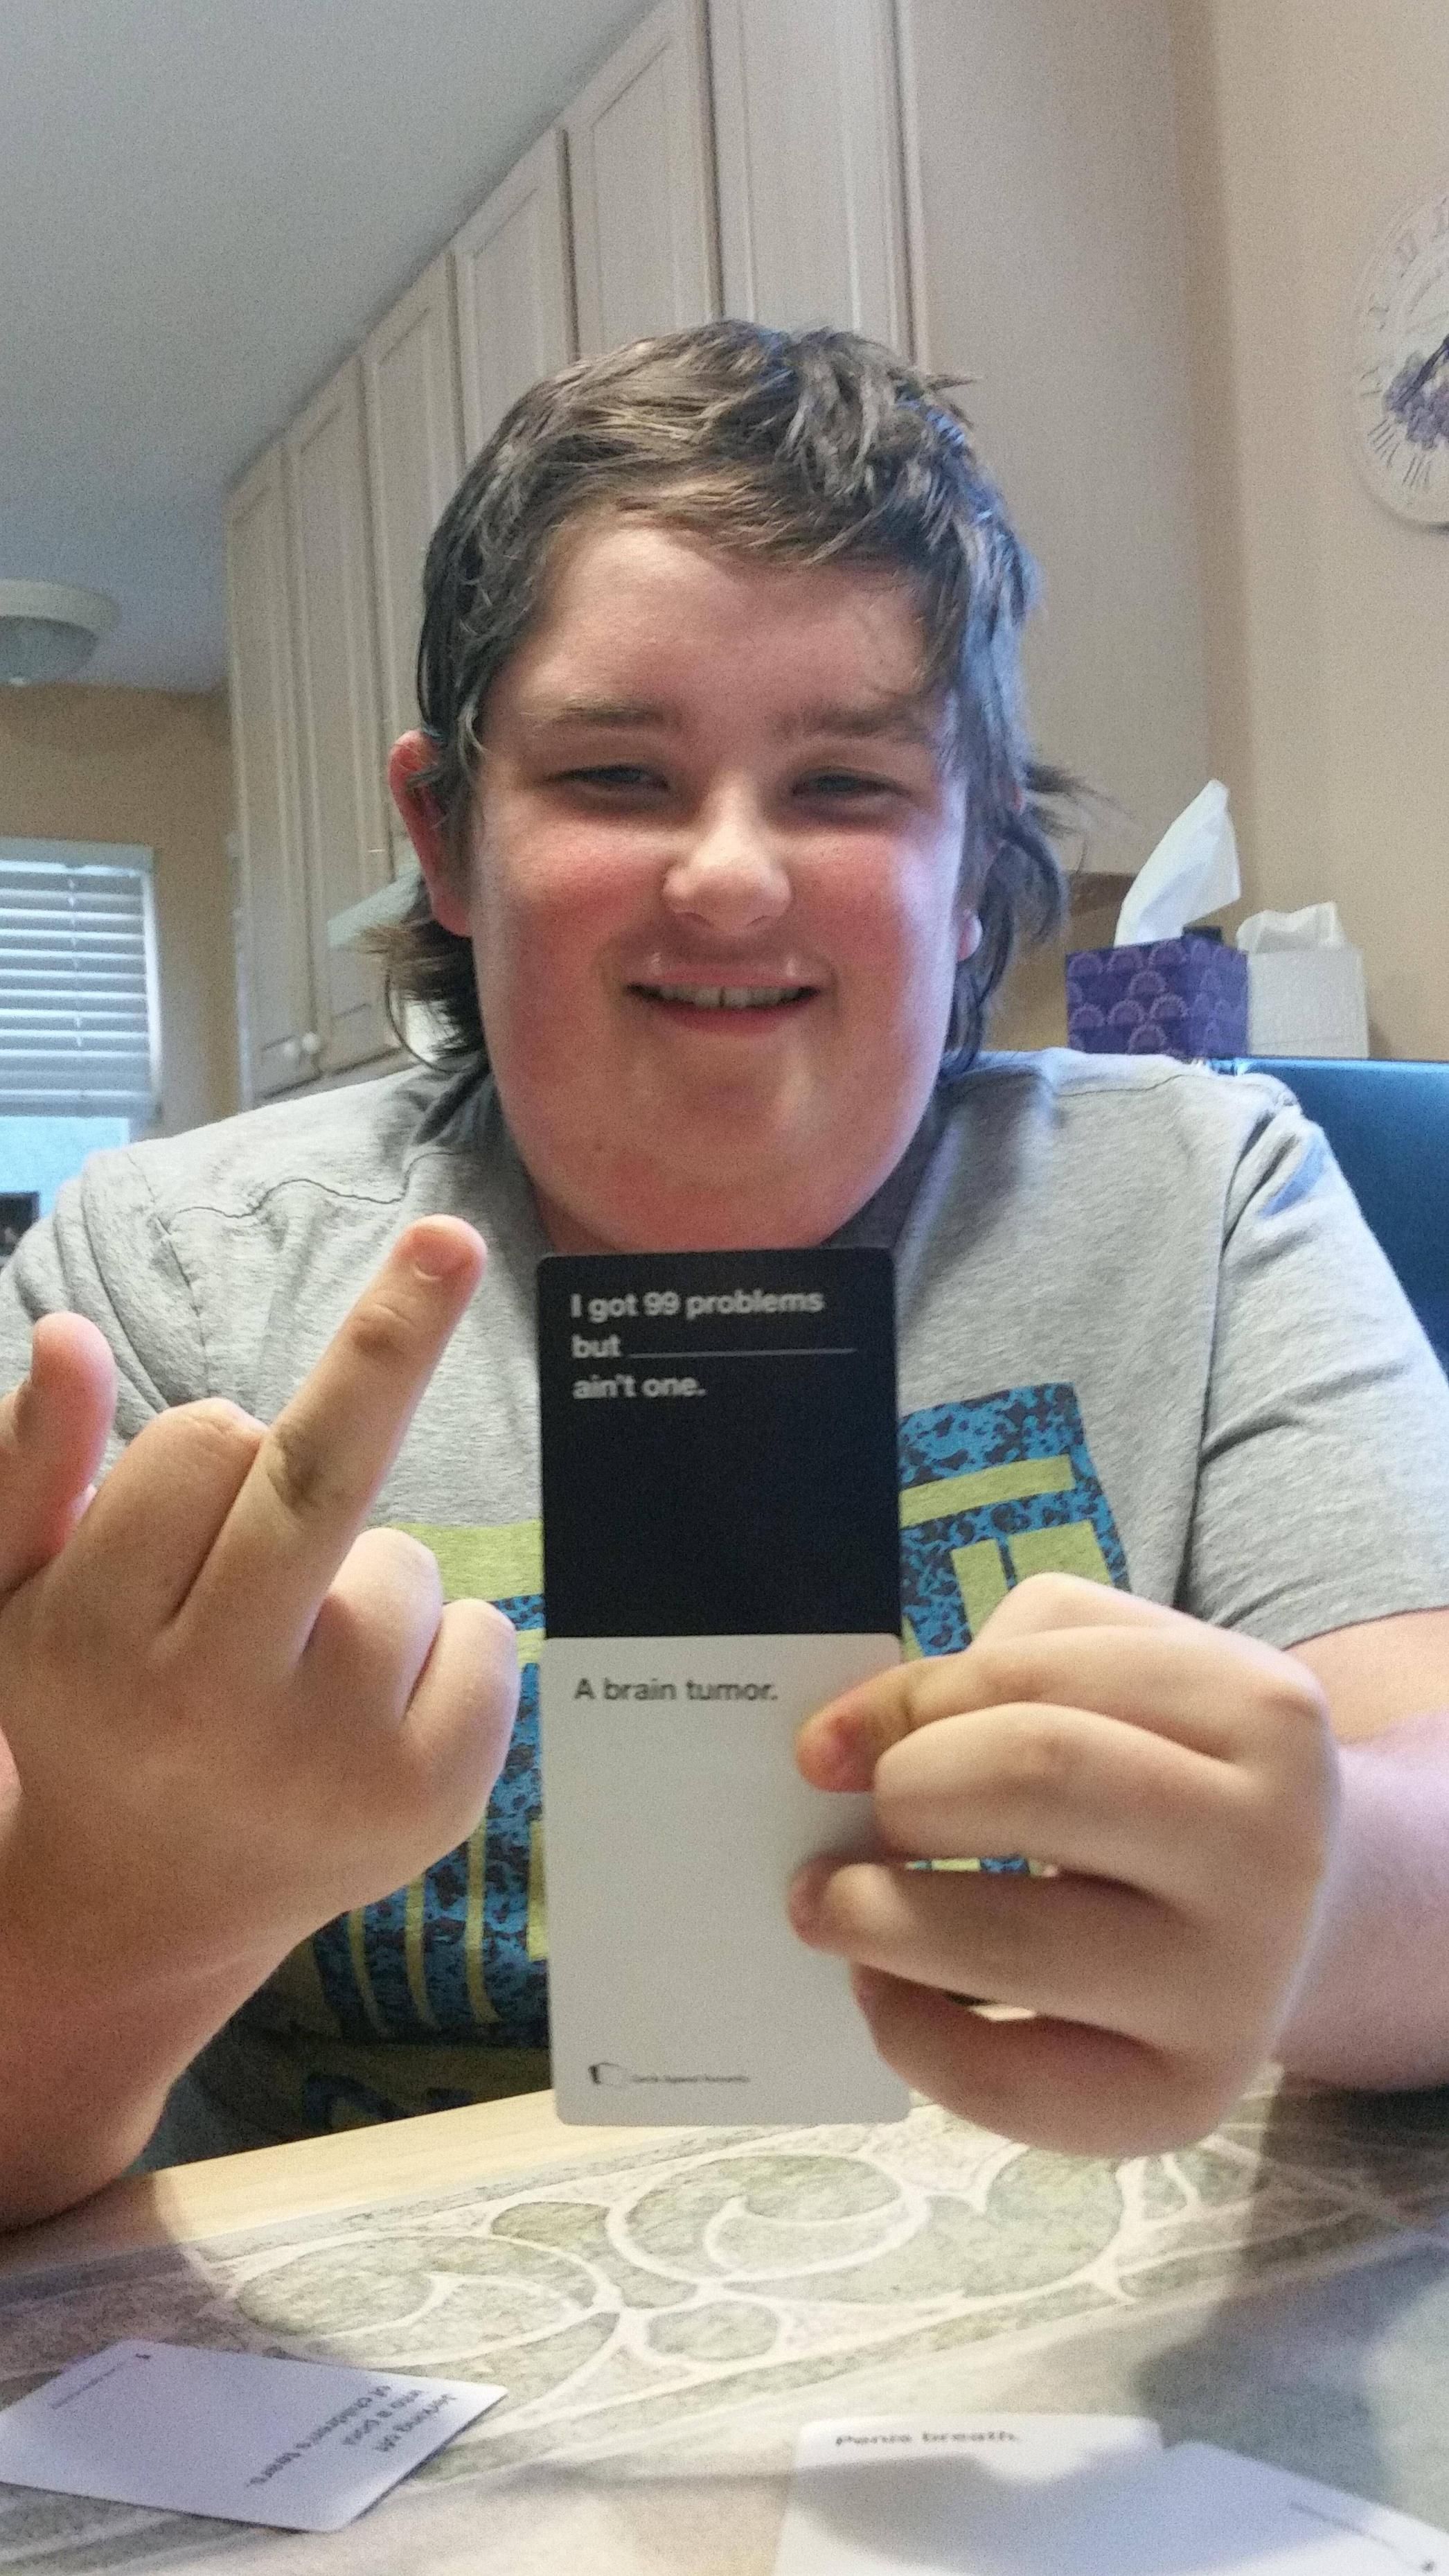 My brother has a brain tumor and I played this in cards against humanity